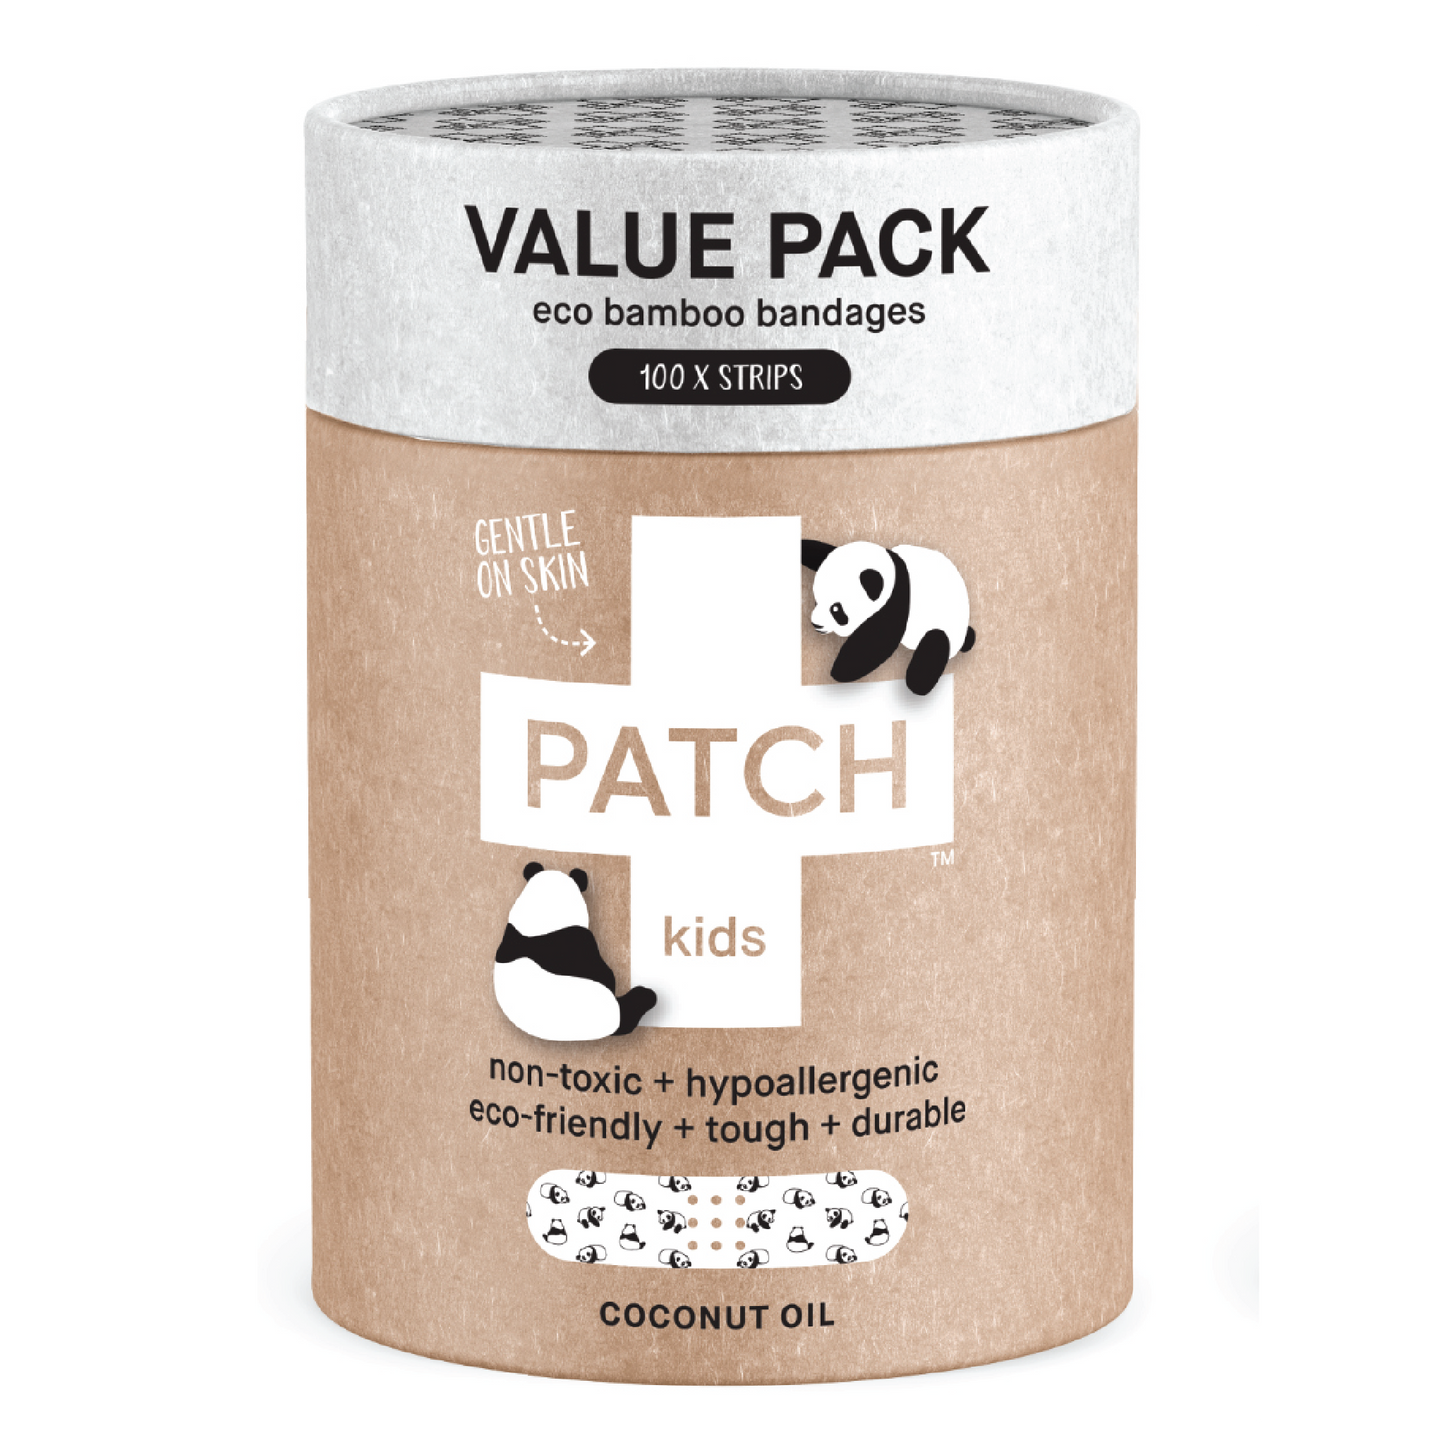 Value Pack Patch Bandages coconut oil eco friendly hypoallergenic non-toxic durable